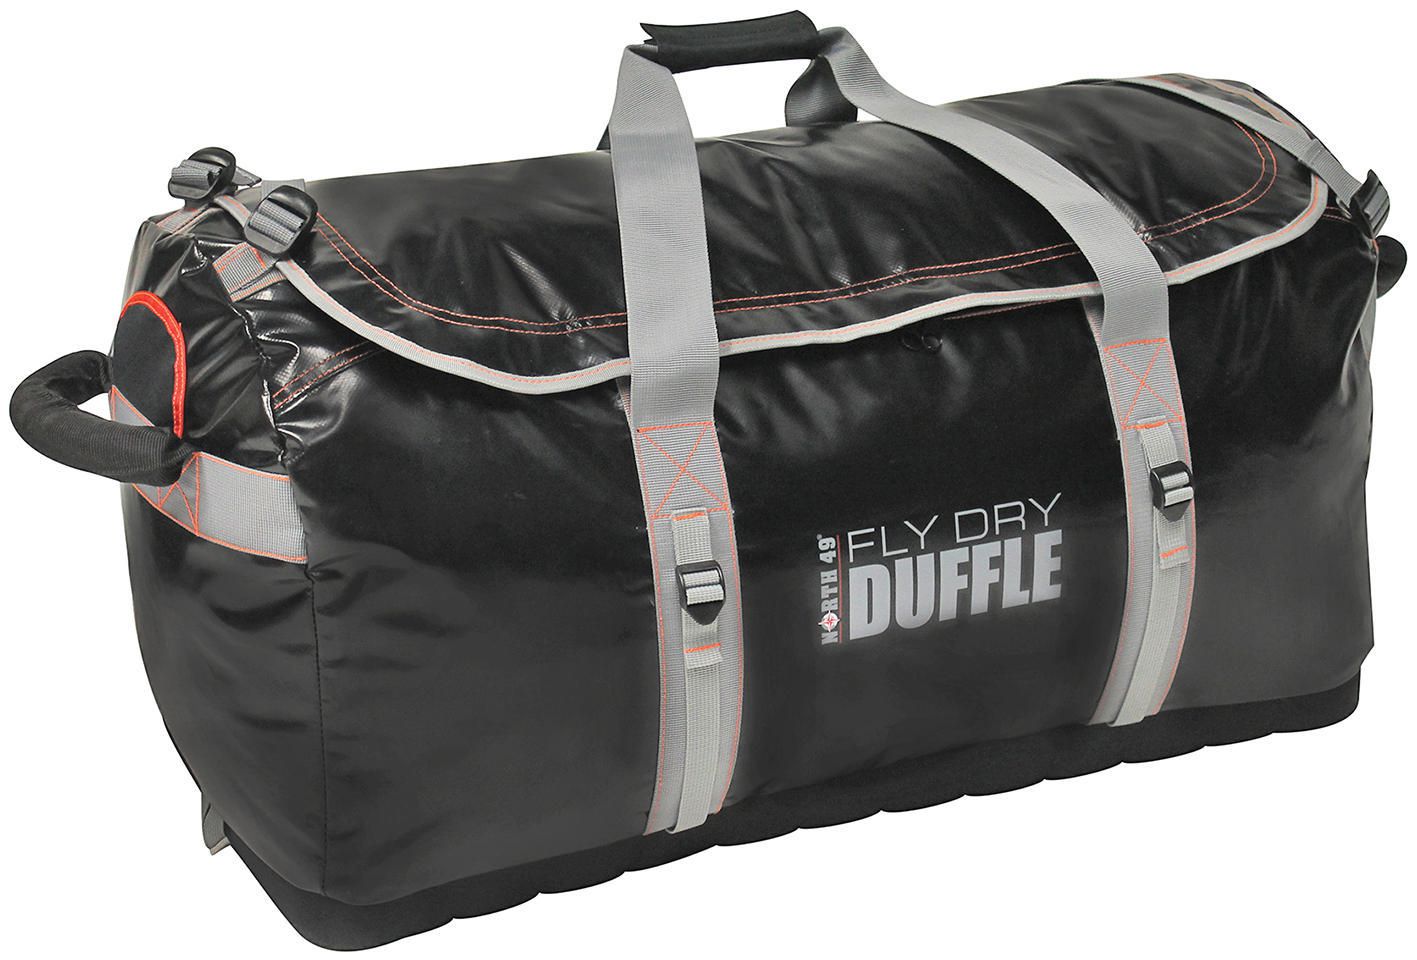 North 49 Fly Dry Travel Duffle Bag (M & L) - KBM Outdoors